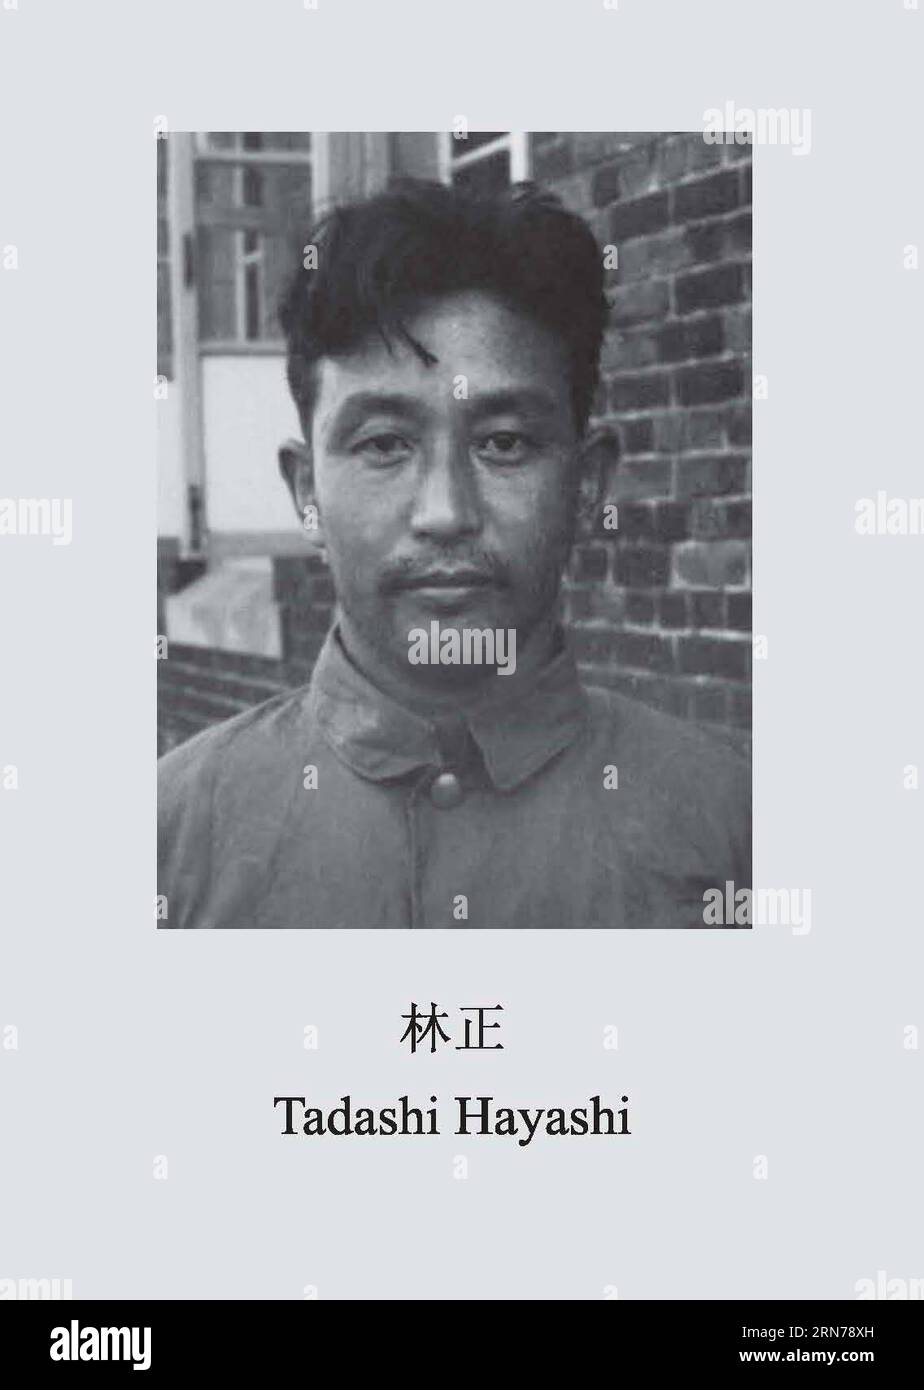 (150826) -- BEIJING, Aug. 26, 2015 () -- Photo released on Aug. 26, 2015 by the State Archives Administration of China on its website shows the image of Japanese war criminal Tadashi Hayashi. The sixteenth in a series of 31 handwritten confessions from Japanese war criminals published online, the confession features Tadashi Hayashi, who was born in 1920. He joined the Japanese War of Aggression against China in 1941, and was captured in August 1945. Hayashi wrote that during one anatomy lesson for medical trainees, a military doctor injected a prisoner to put him into a trance . The doctor the Stock Photo